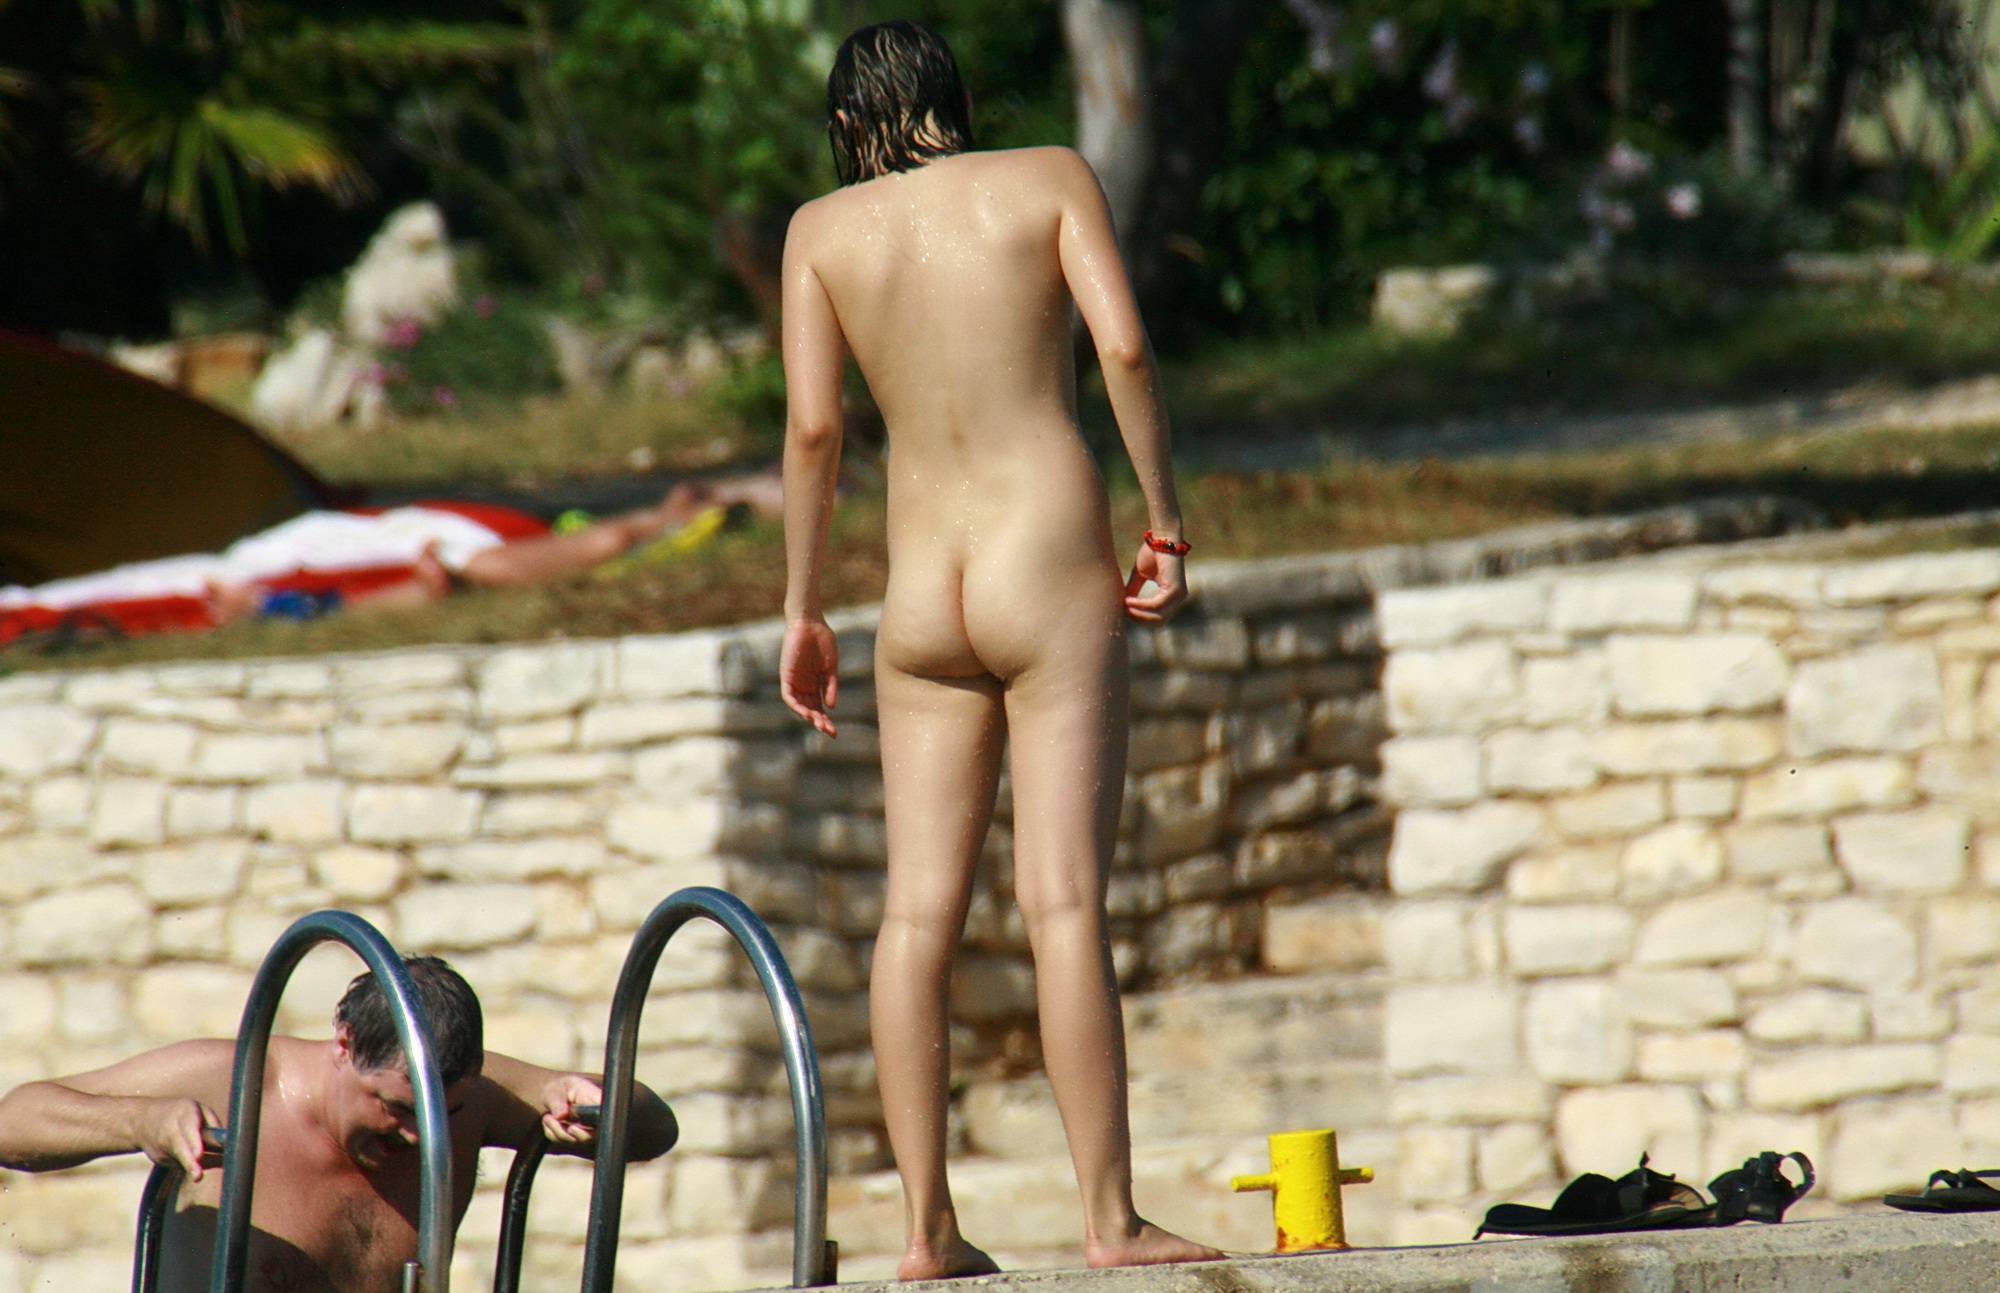 Nudist Pictures Sunny Lakeside Strolling - 1